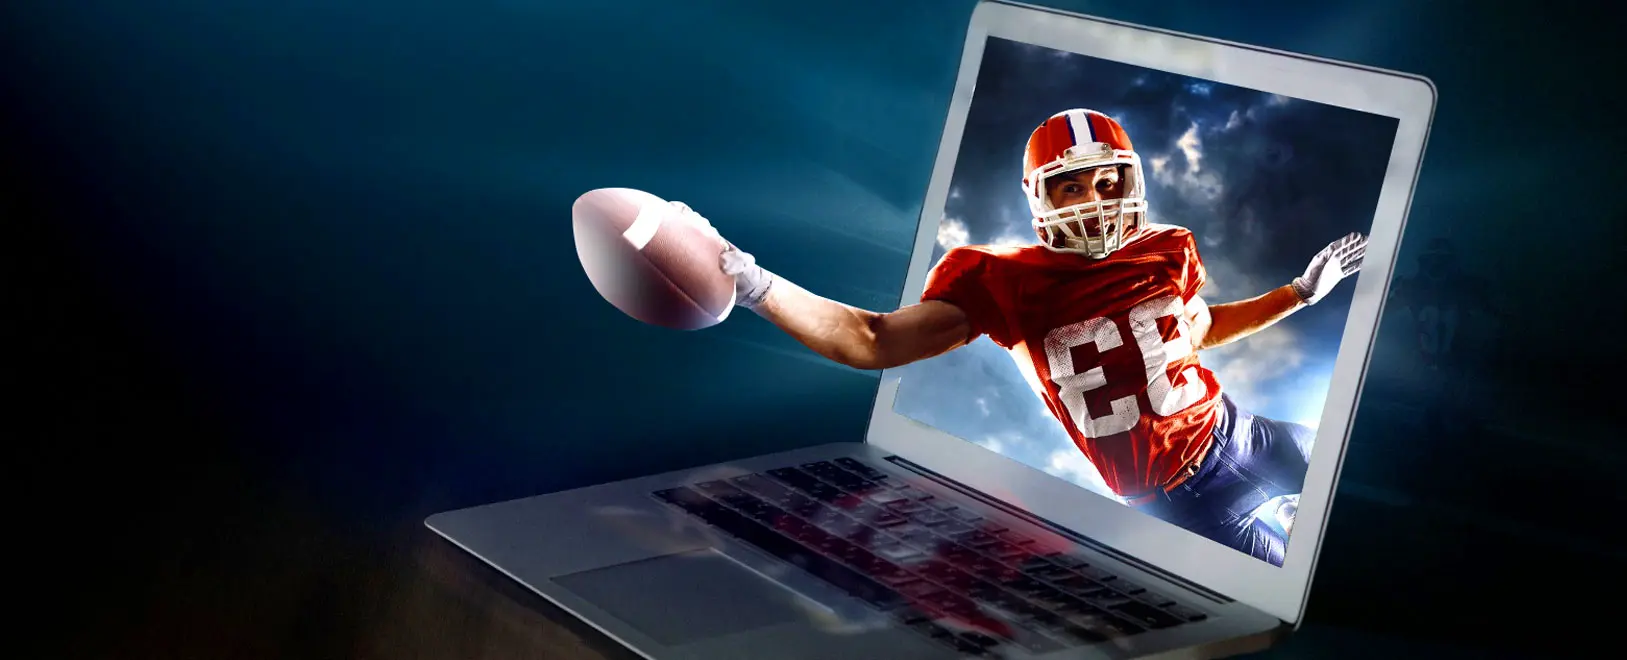 Bet on these Virtual Sports during the Super Bowl! 